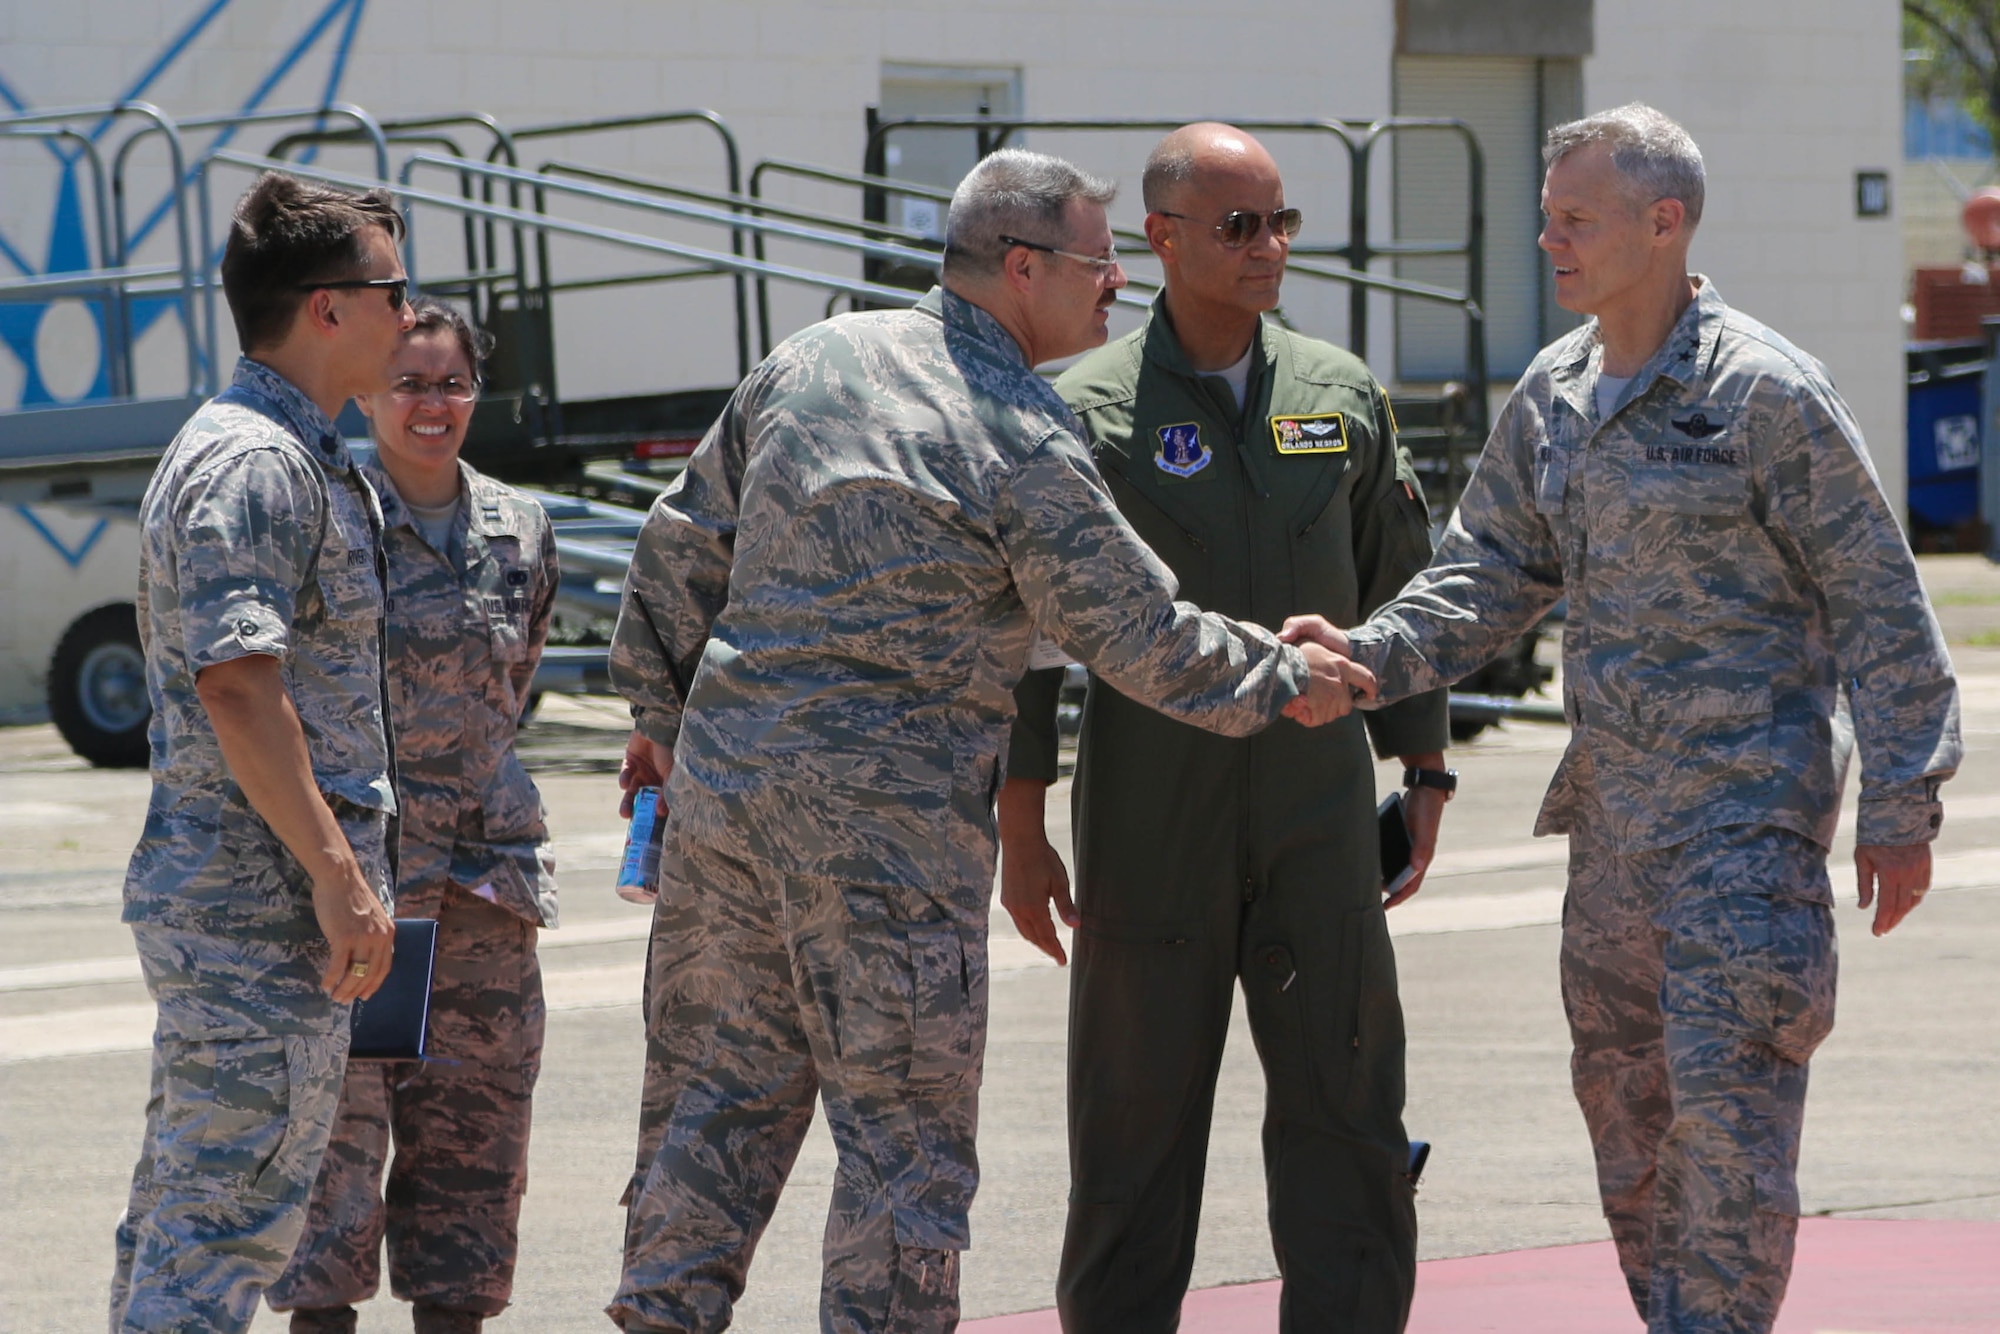 U.S. Air Force Acting Director, Air National Guard, Maj. Gen. Brian G. Neal, greets airmen of the Puerto Rico Air National Guard during his April 9 visit to the 156th Airlift Wing, Muñiz Air National Guard Base, Carolina, Puerto Rico. Neal attended briefings and toured facilities at the 156th AW and the 141st Air Control Squadron, Punta Borinquen Radar Site, Aguadilla, Puerto Rico. (U.S. Army  National Guard photo by Sgt. Alexis Velez)